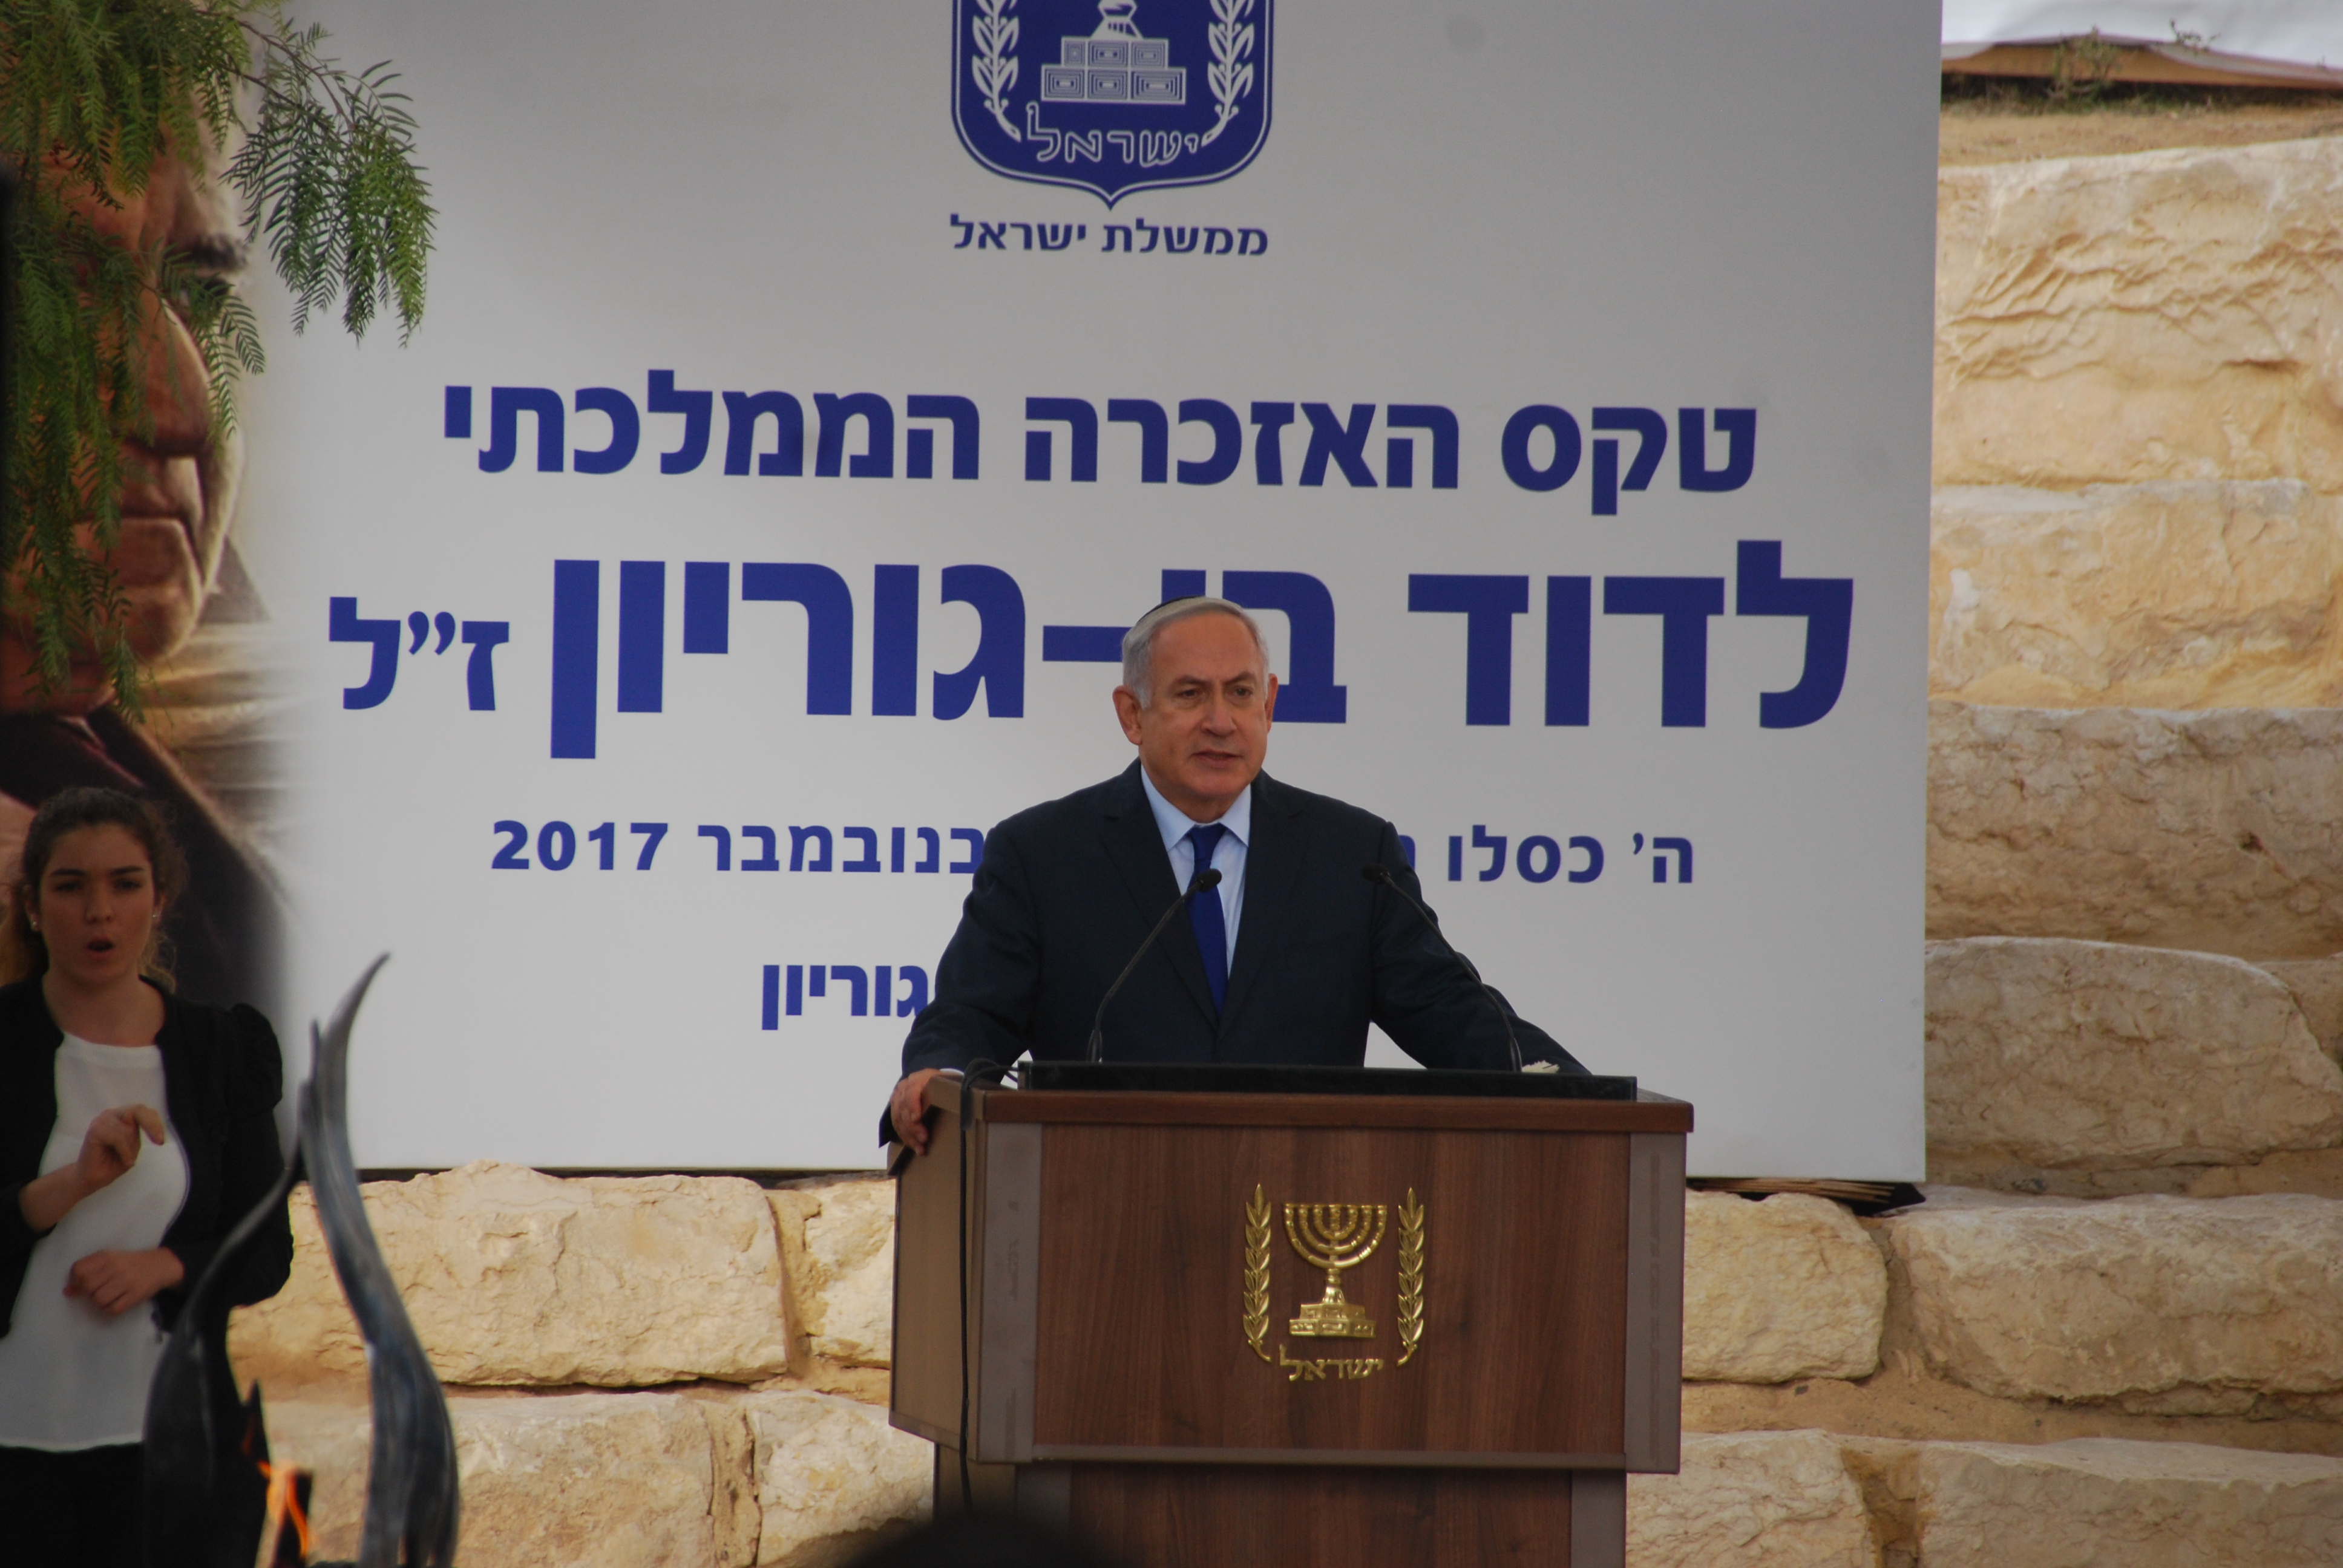 Statements by Prime Minister Benjamin Netanyahu and President of Cyprus Nicos Anastasiades